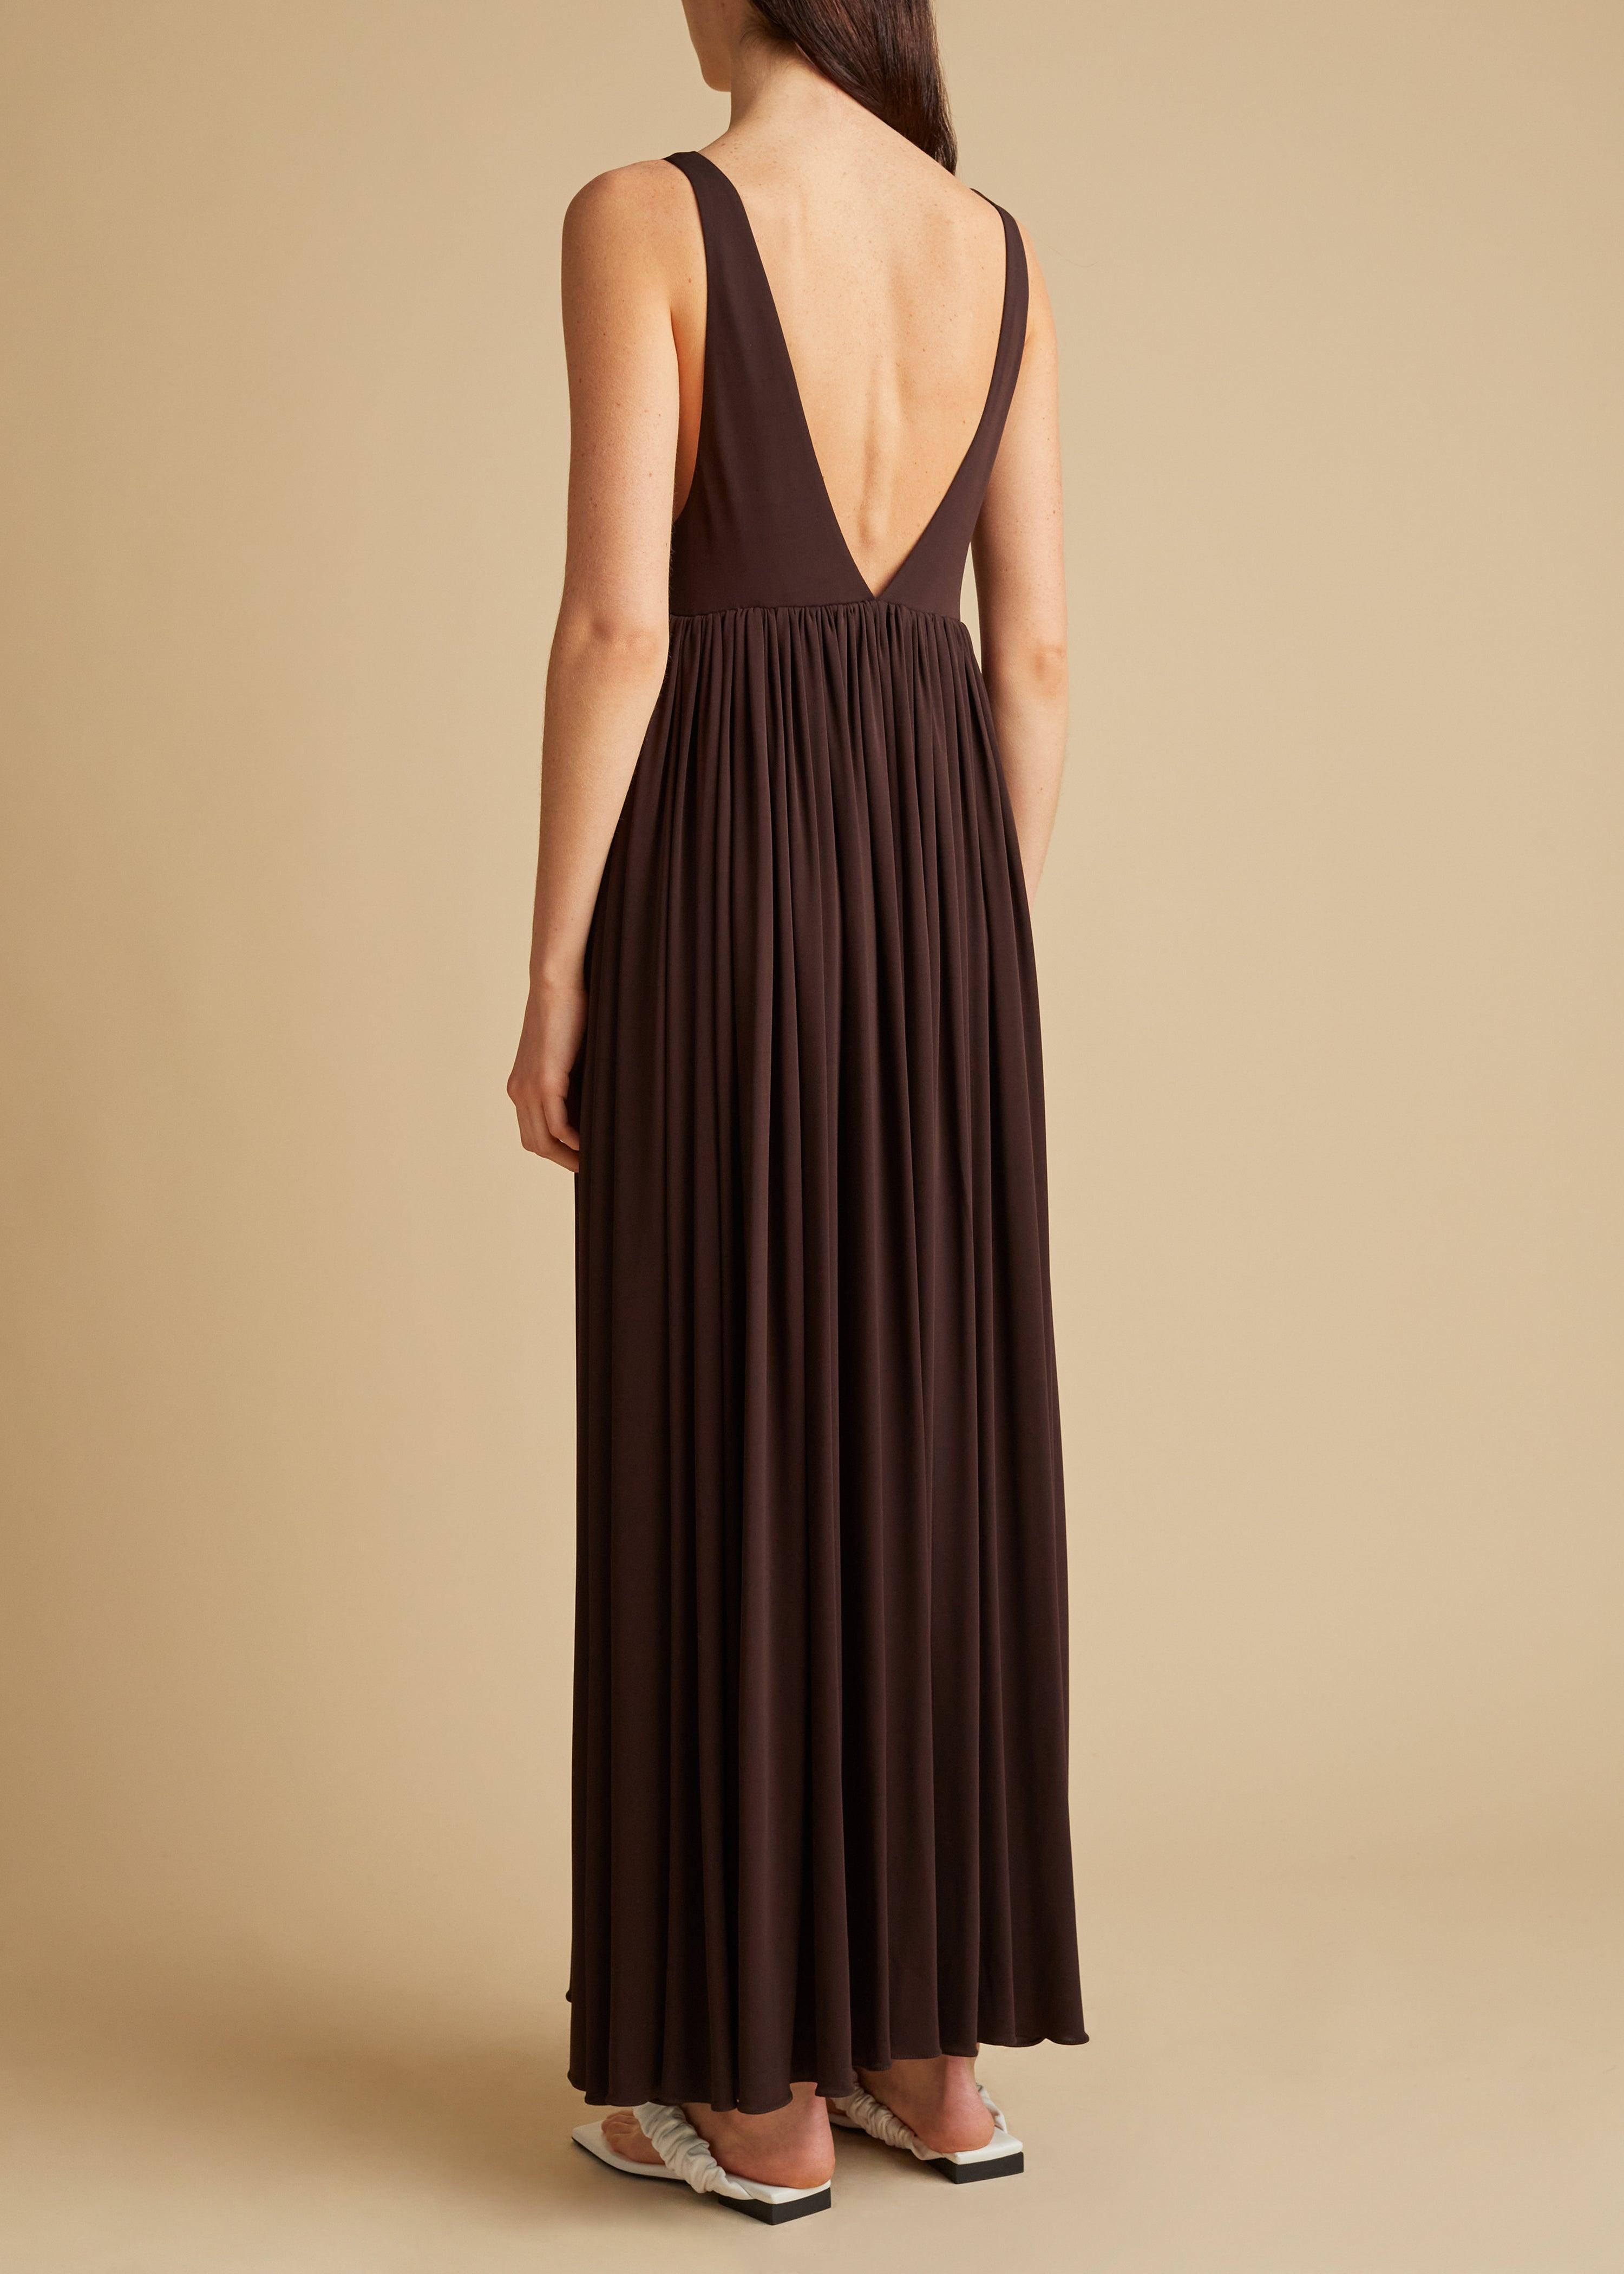 The Layas Dress in Dark Brown - The Iconic Issue